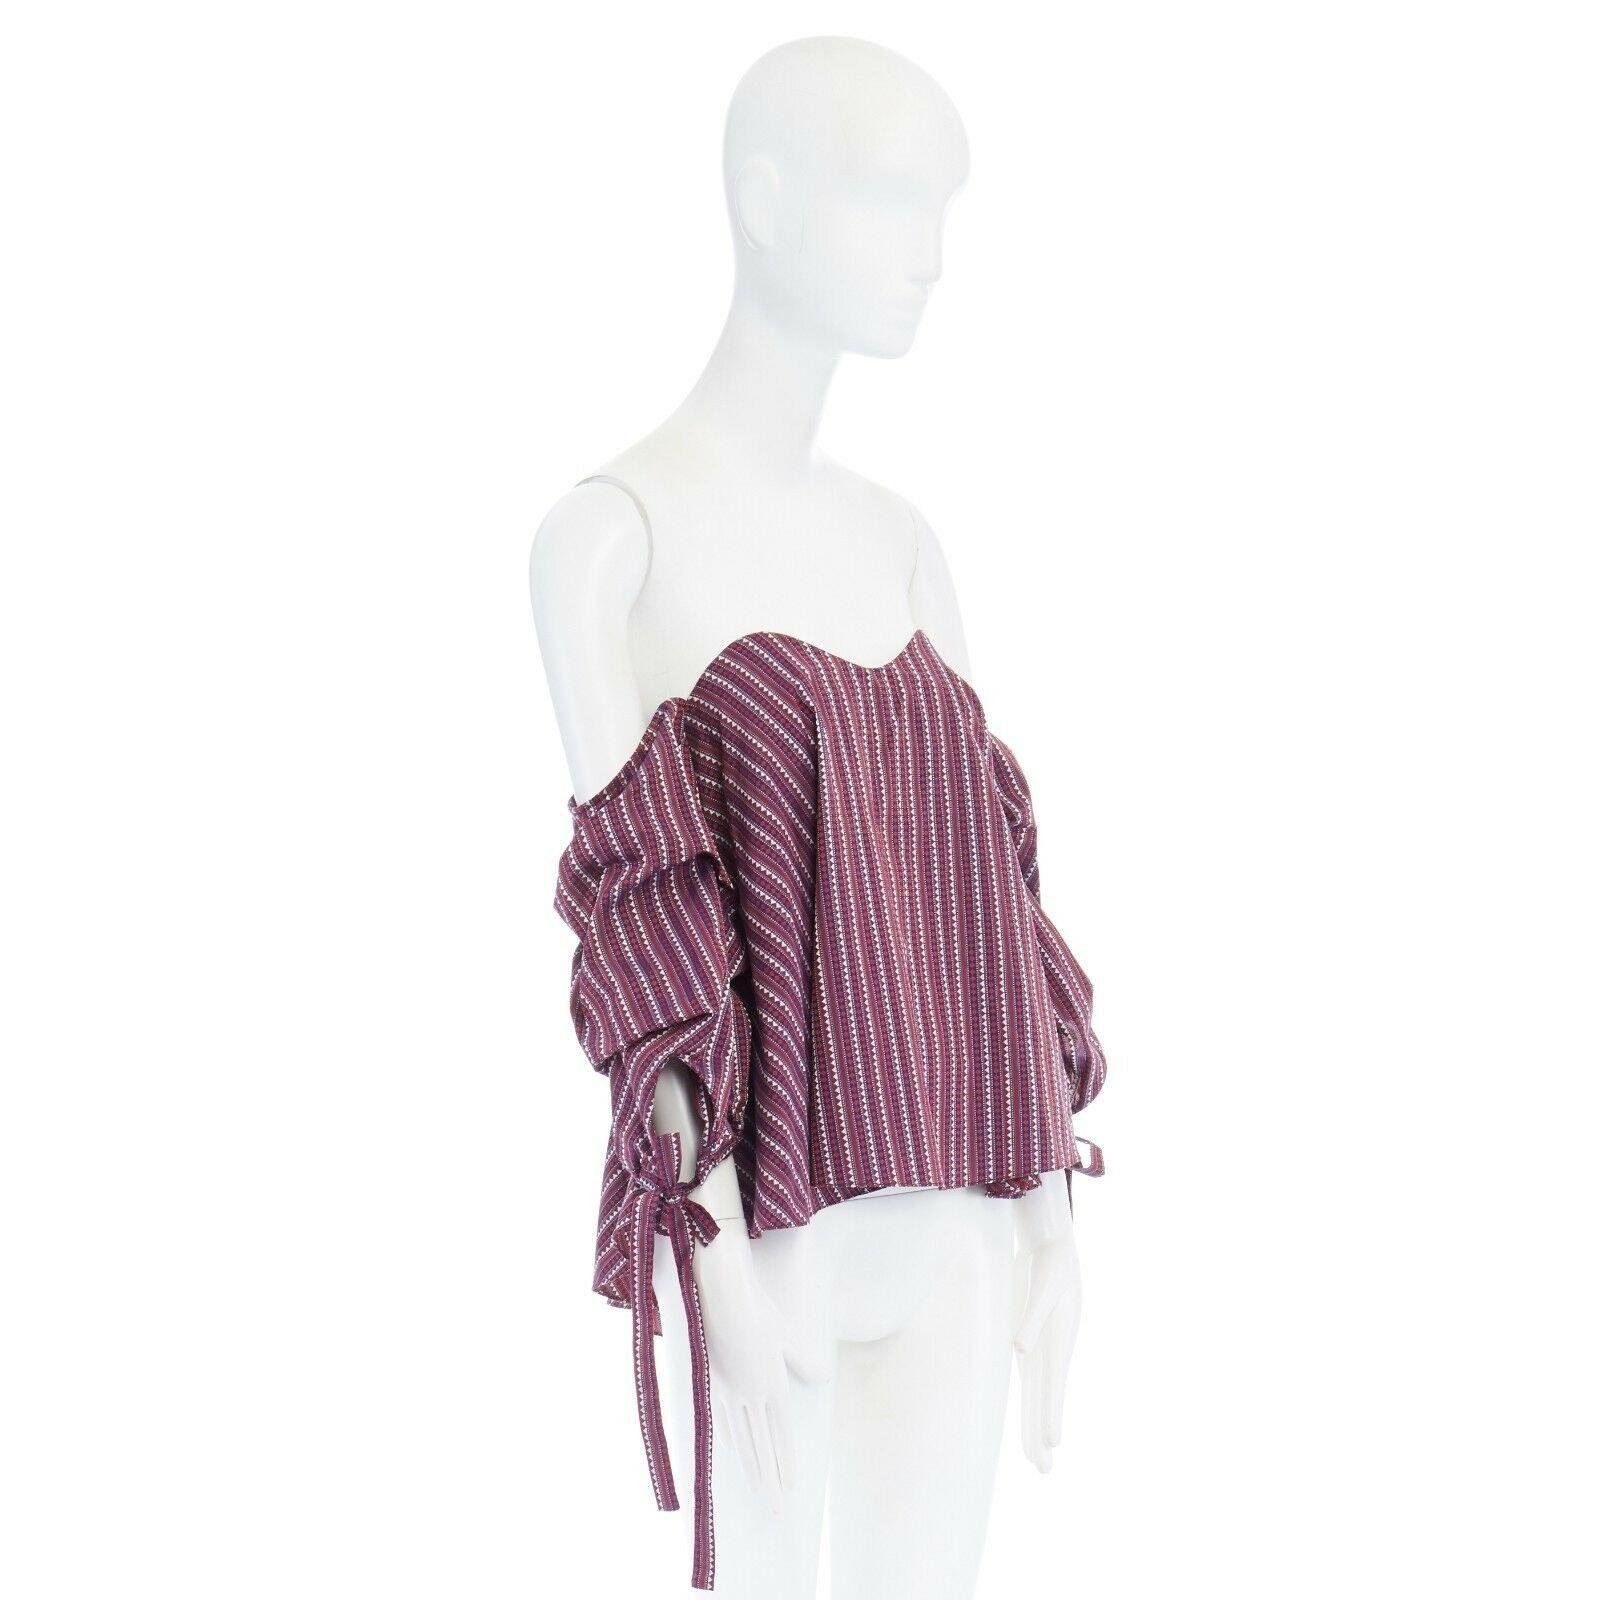 CAROLINE CONSTAS Gabriella purple ethnic jacquard off shoulder bustier top XS 
Reference: LNKO/A00403 
Brand: Caroline Constas 
Designer: Caroline Constas 
Material: Cotton 
Color: Red 
Pattern: Other 
Closure: Zip 
Extra Detail: Gabriella bustier